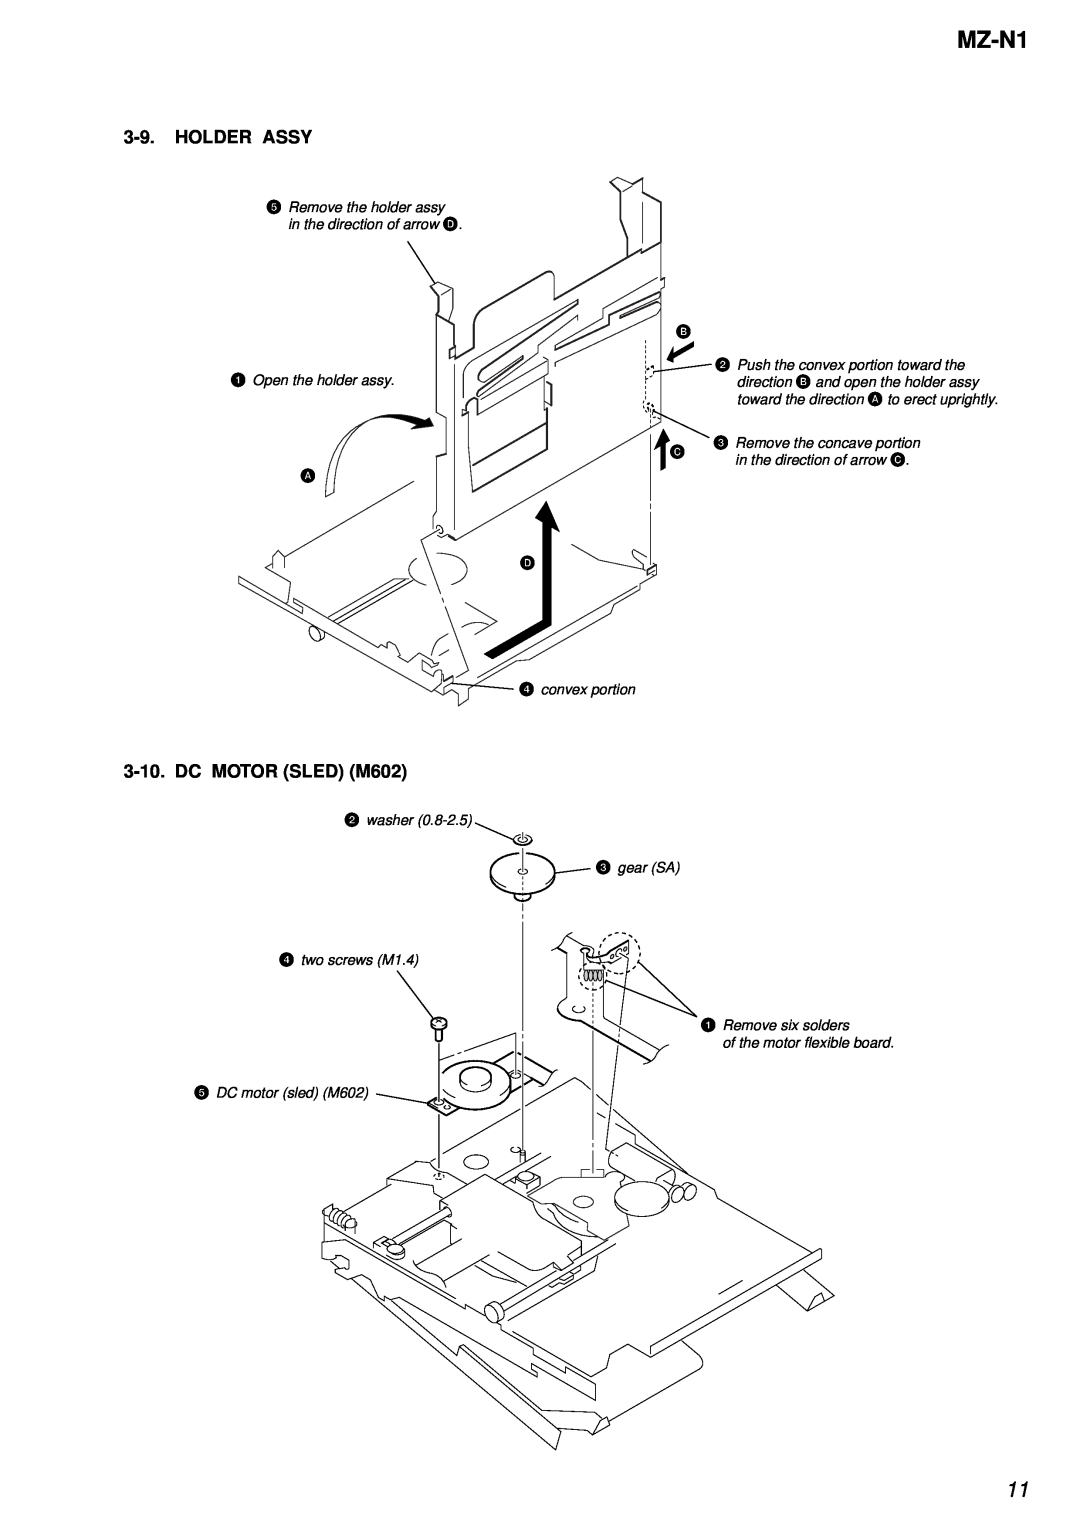 Sony MZ-N1 service manual Holder Assy, DC MOTOR SLED M602, Remove the concave portion, in the direction of arrow C 